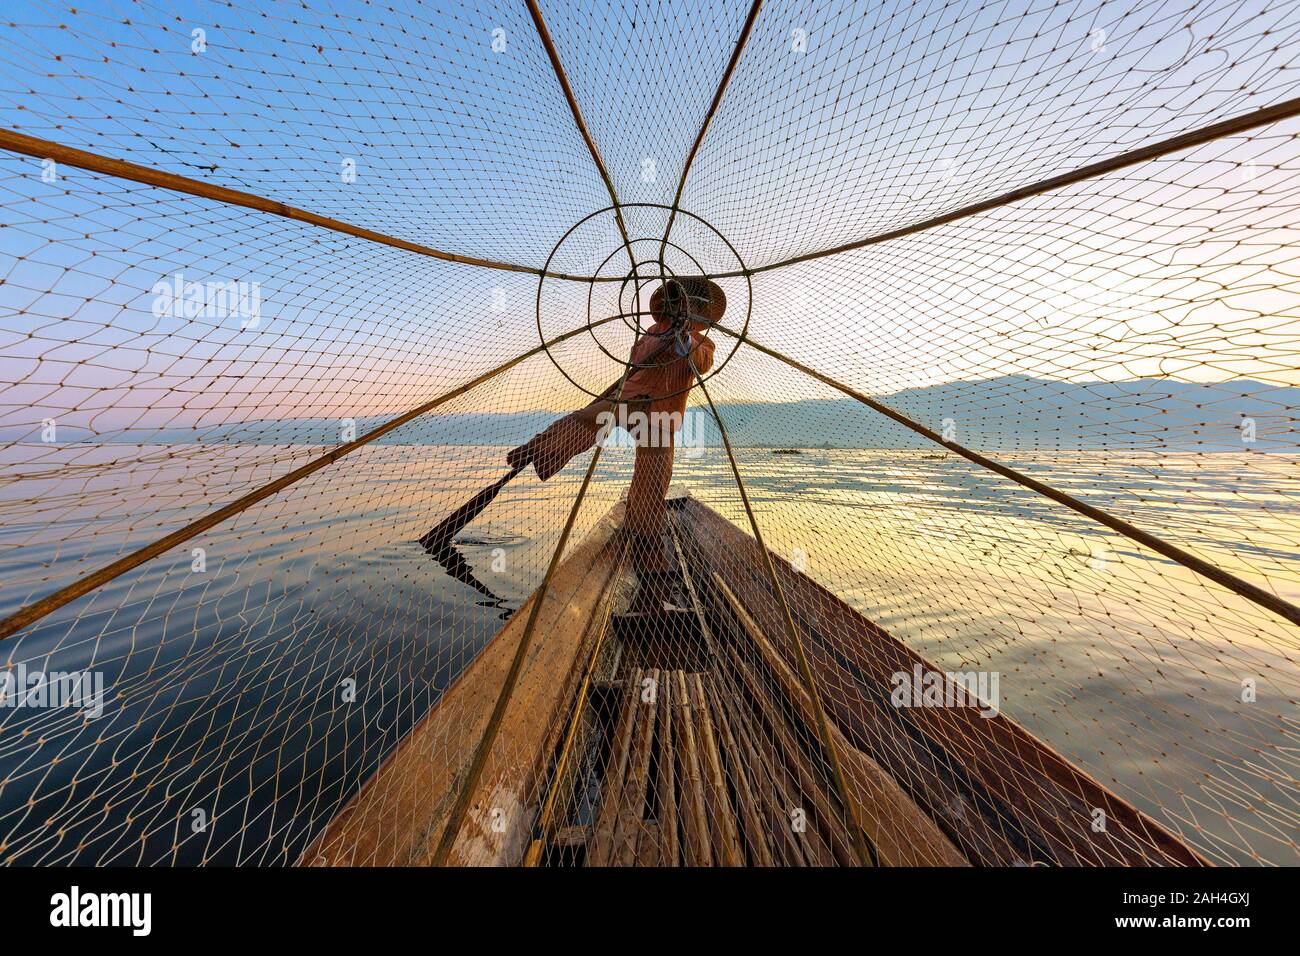 Fishermen in Inle Lake known also as leg rowers, Myanmar Stock Photo